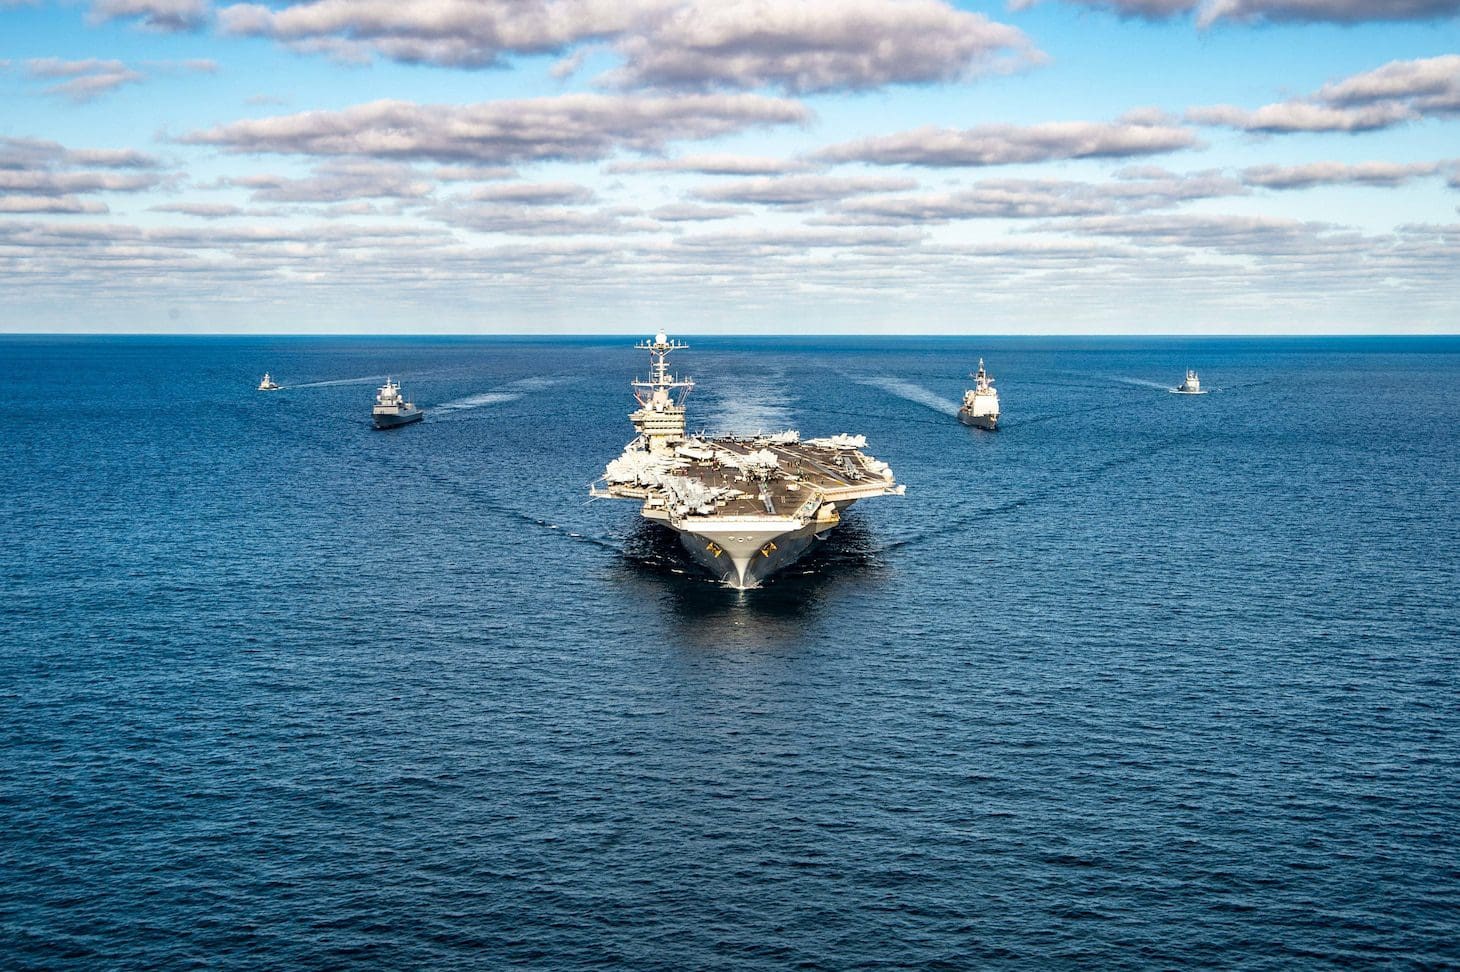 Wide shot of aircraft carrier with escort ships in the ocean